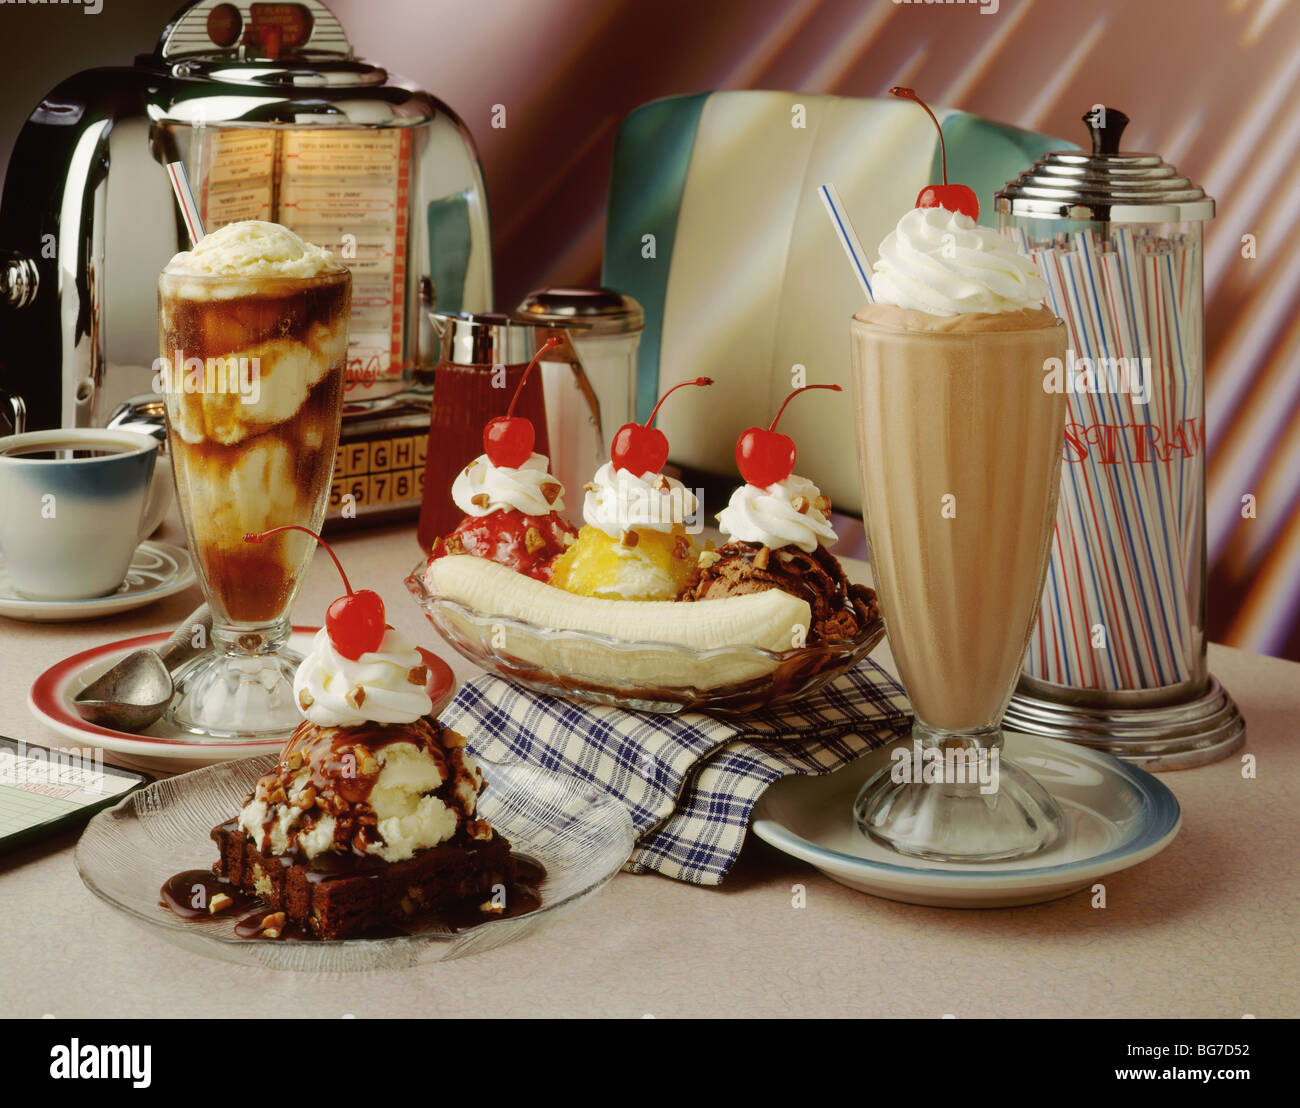 Diner soda fountain desserts Banque D'Images